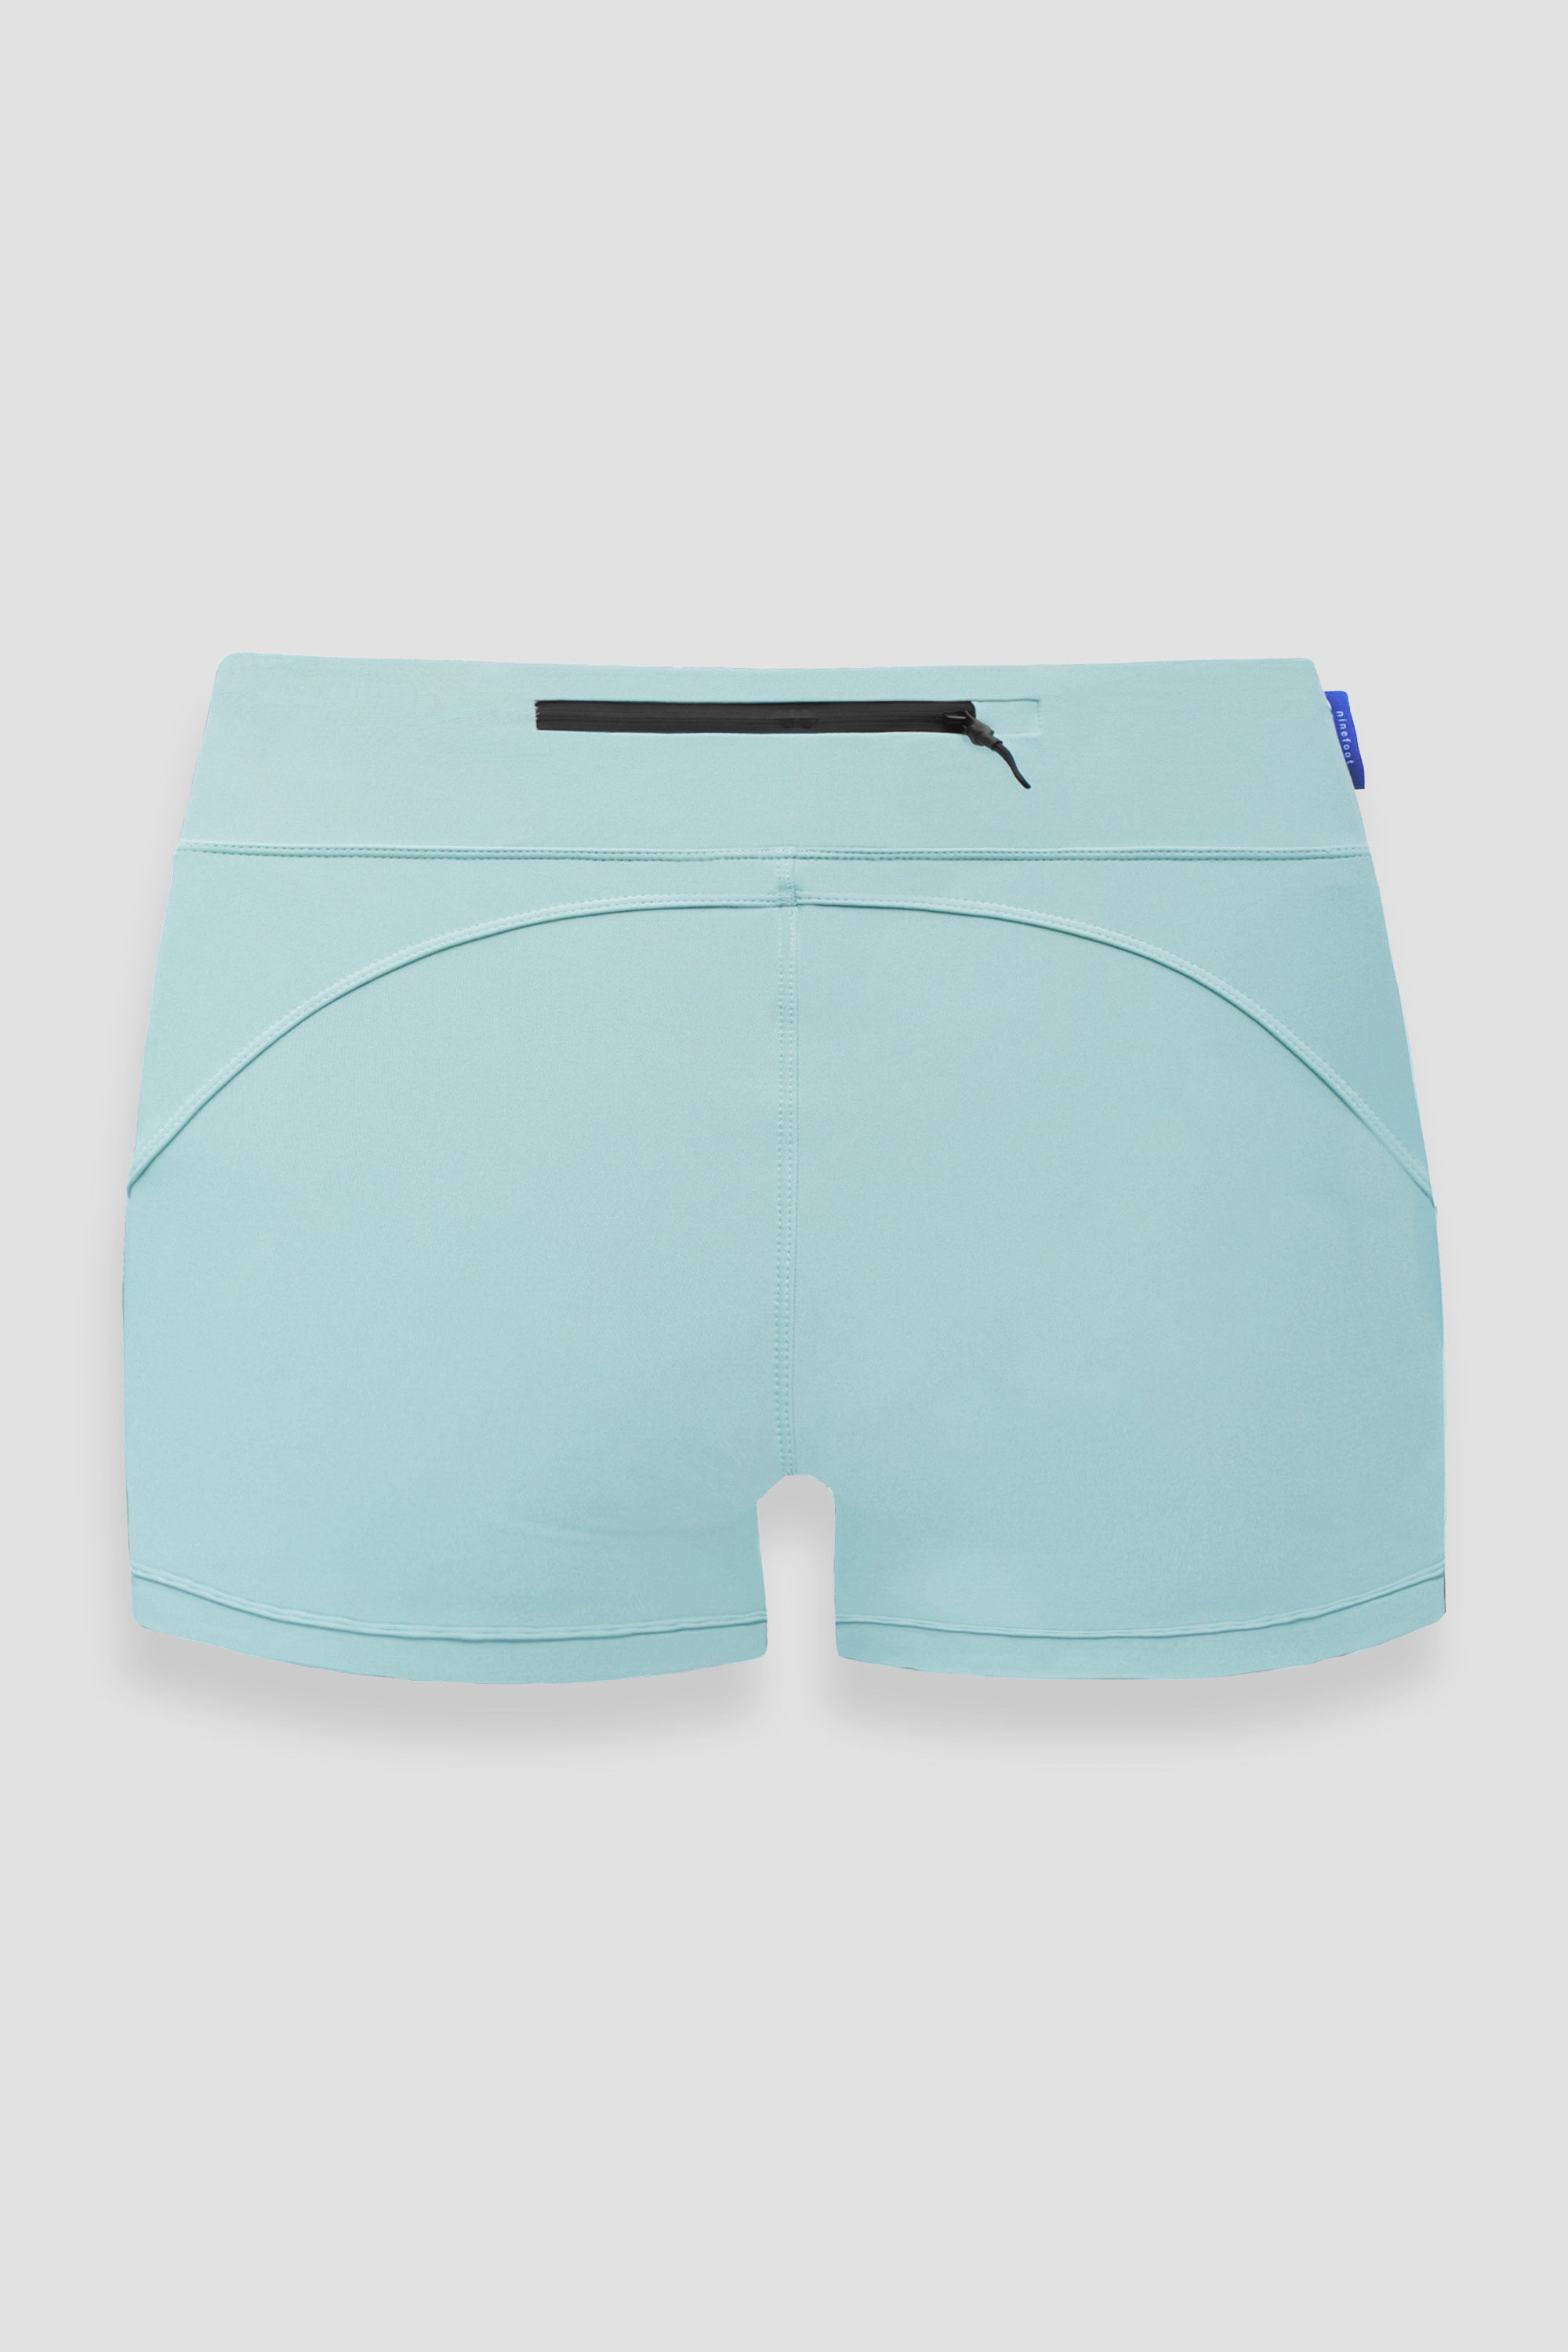 gerupuk yoga and surf shorts in mint color flat photo back side